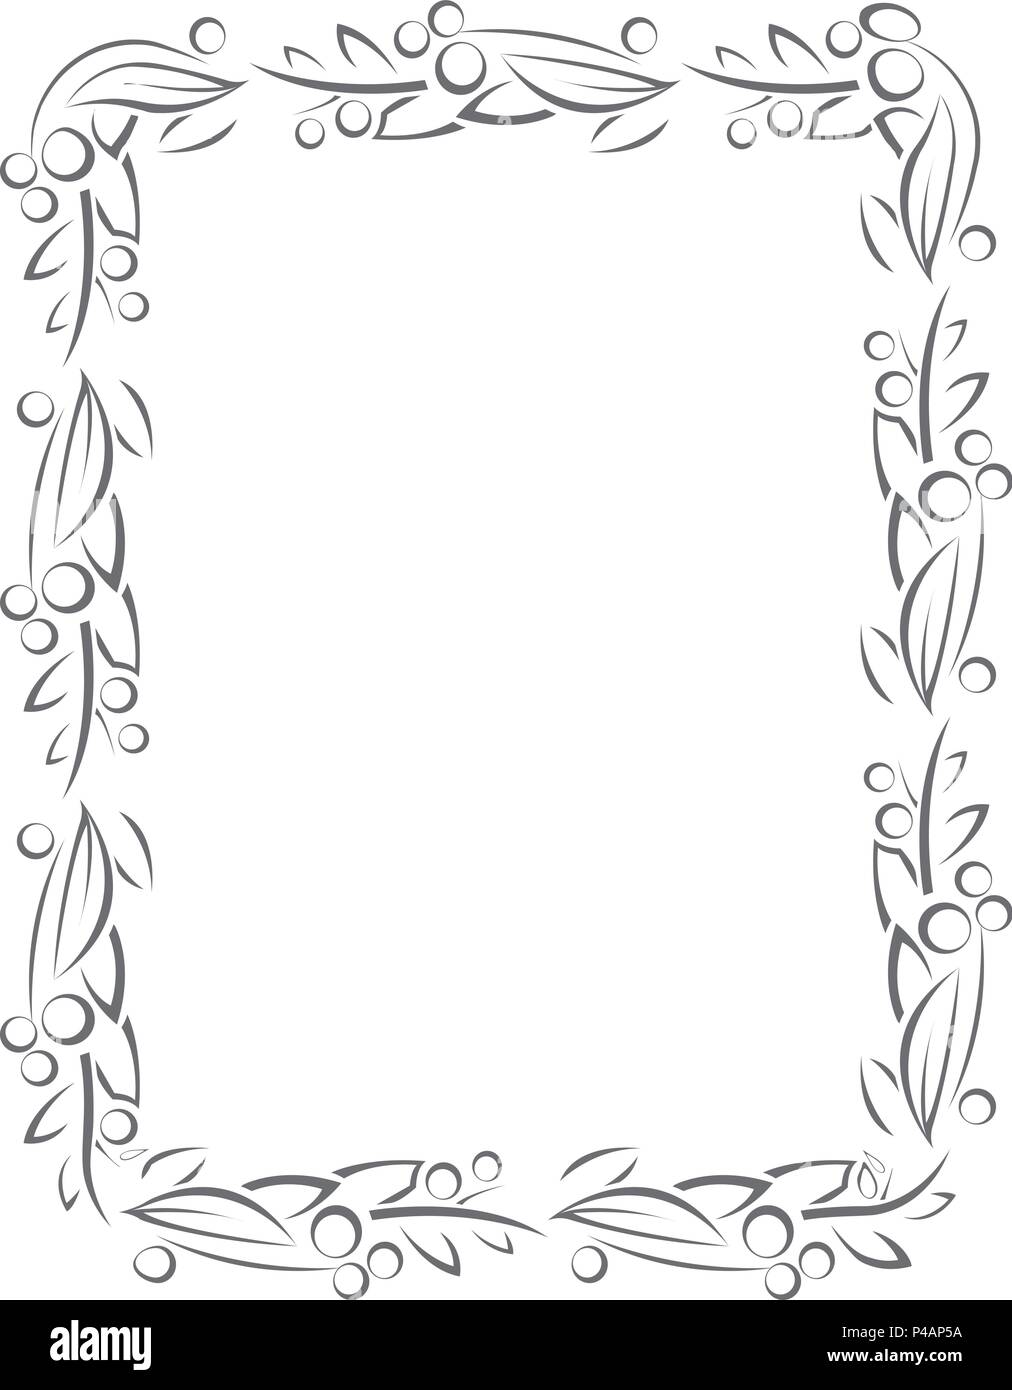 Flourish frame with leaves and berries in line style Stock Vector Image ...